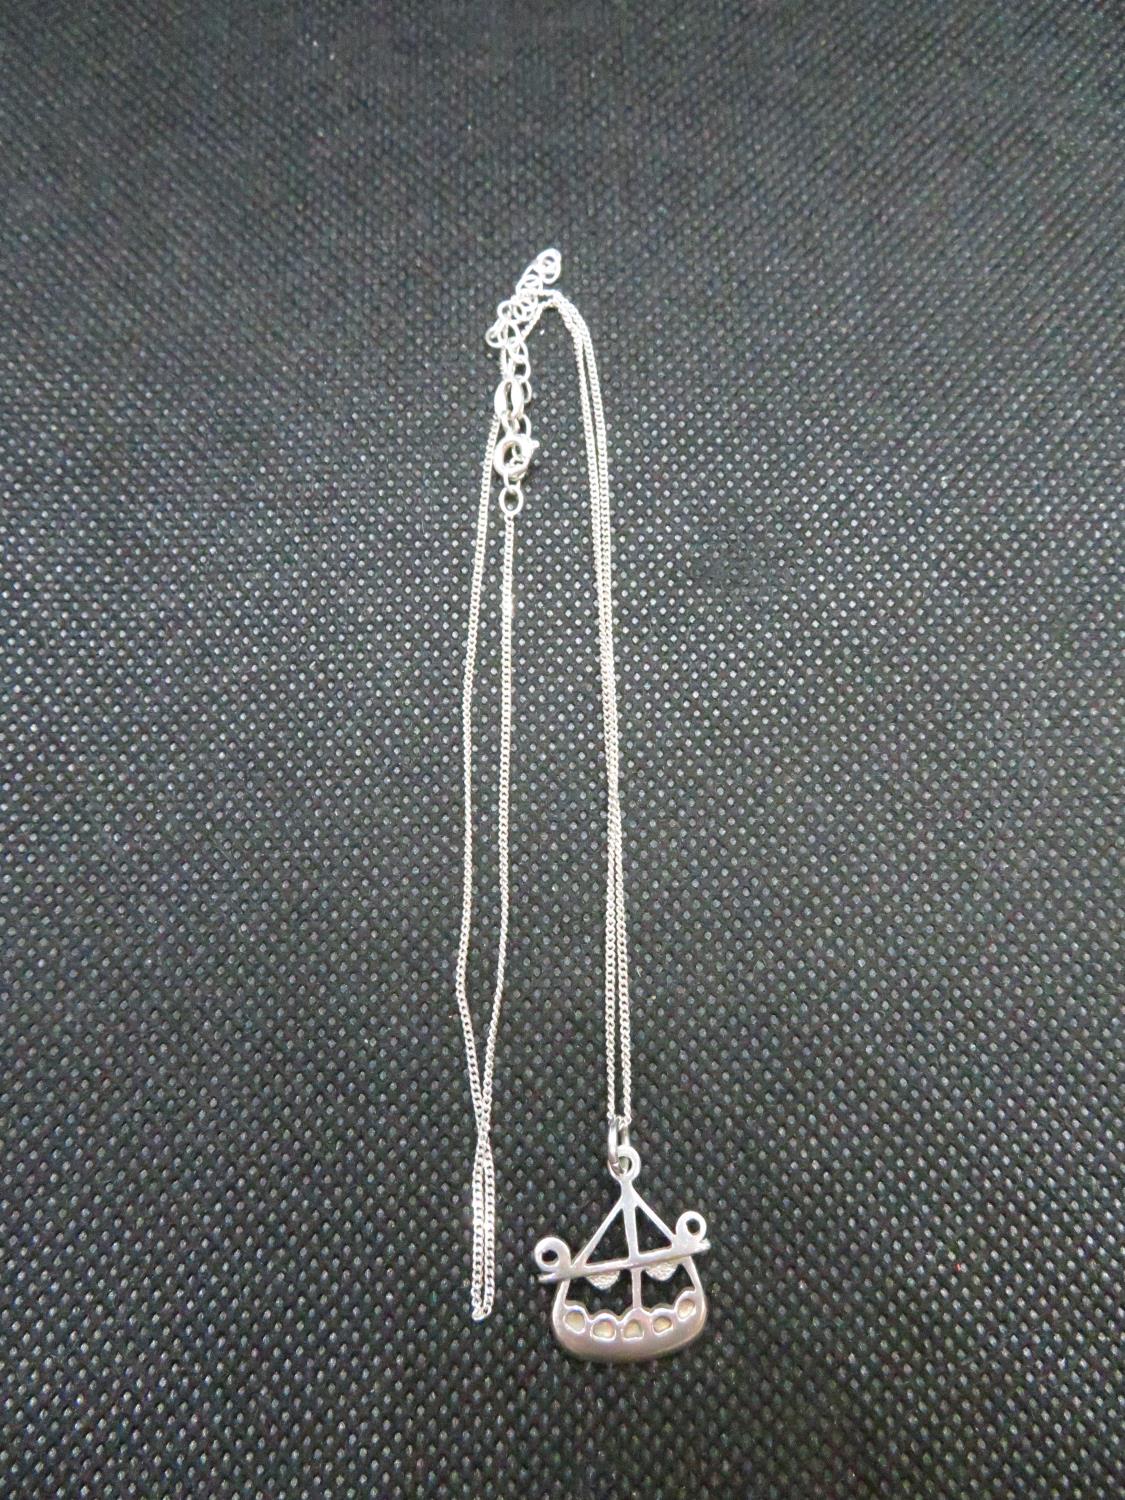 Celtic style Viking ship pendant by OLA M GORIE on 18" silver curb link chain